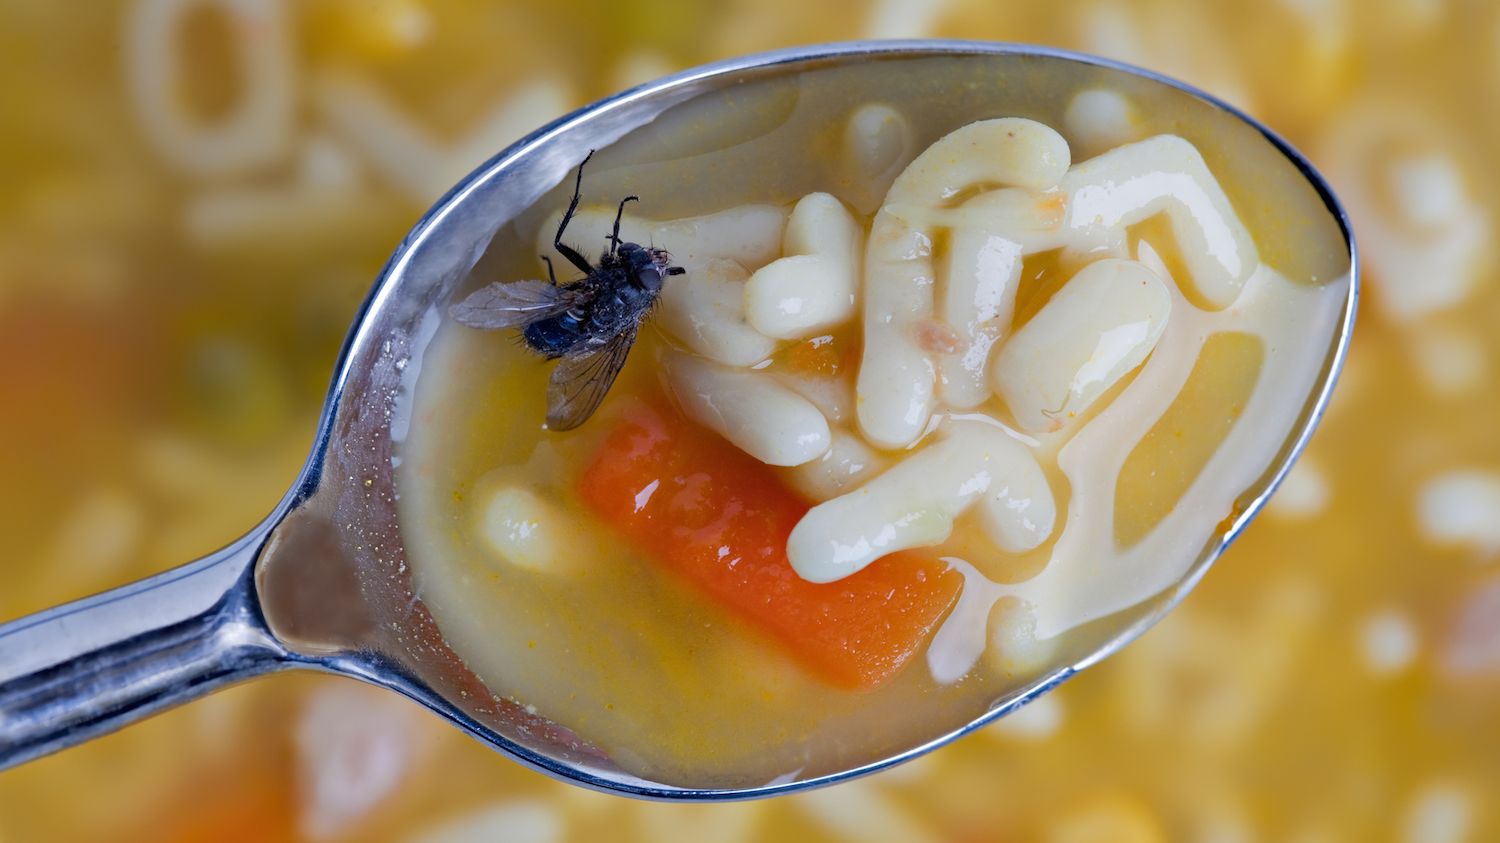 What Happens When a Fly Lands on Your Food? | Mental Floss